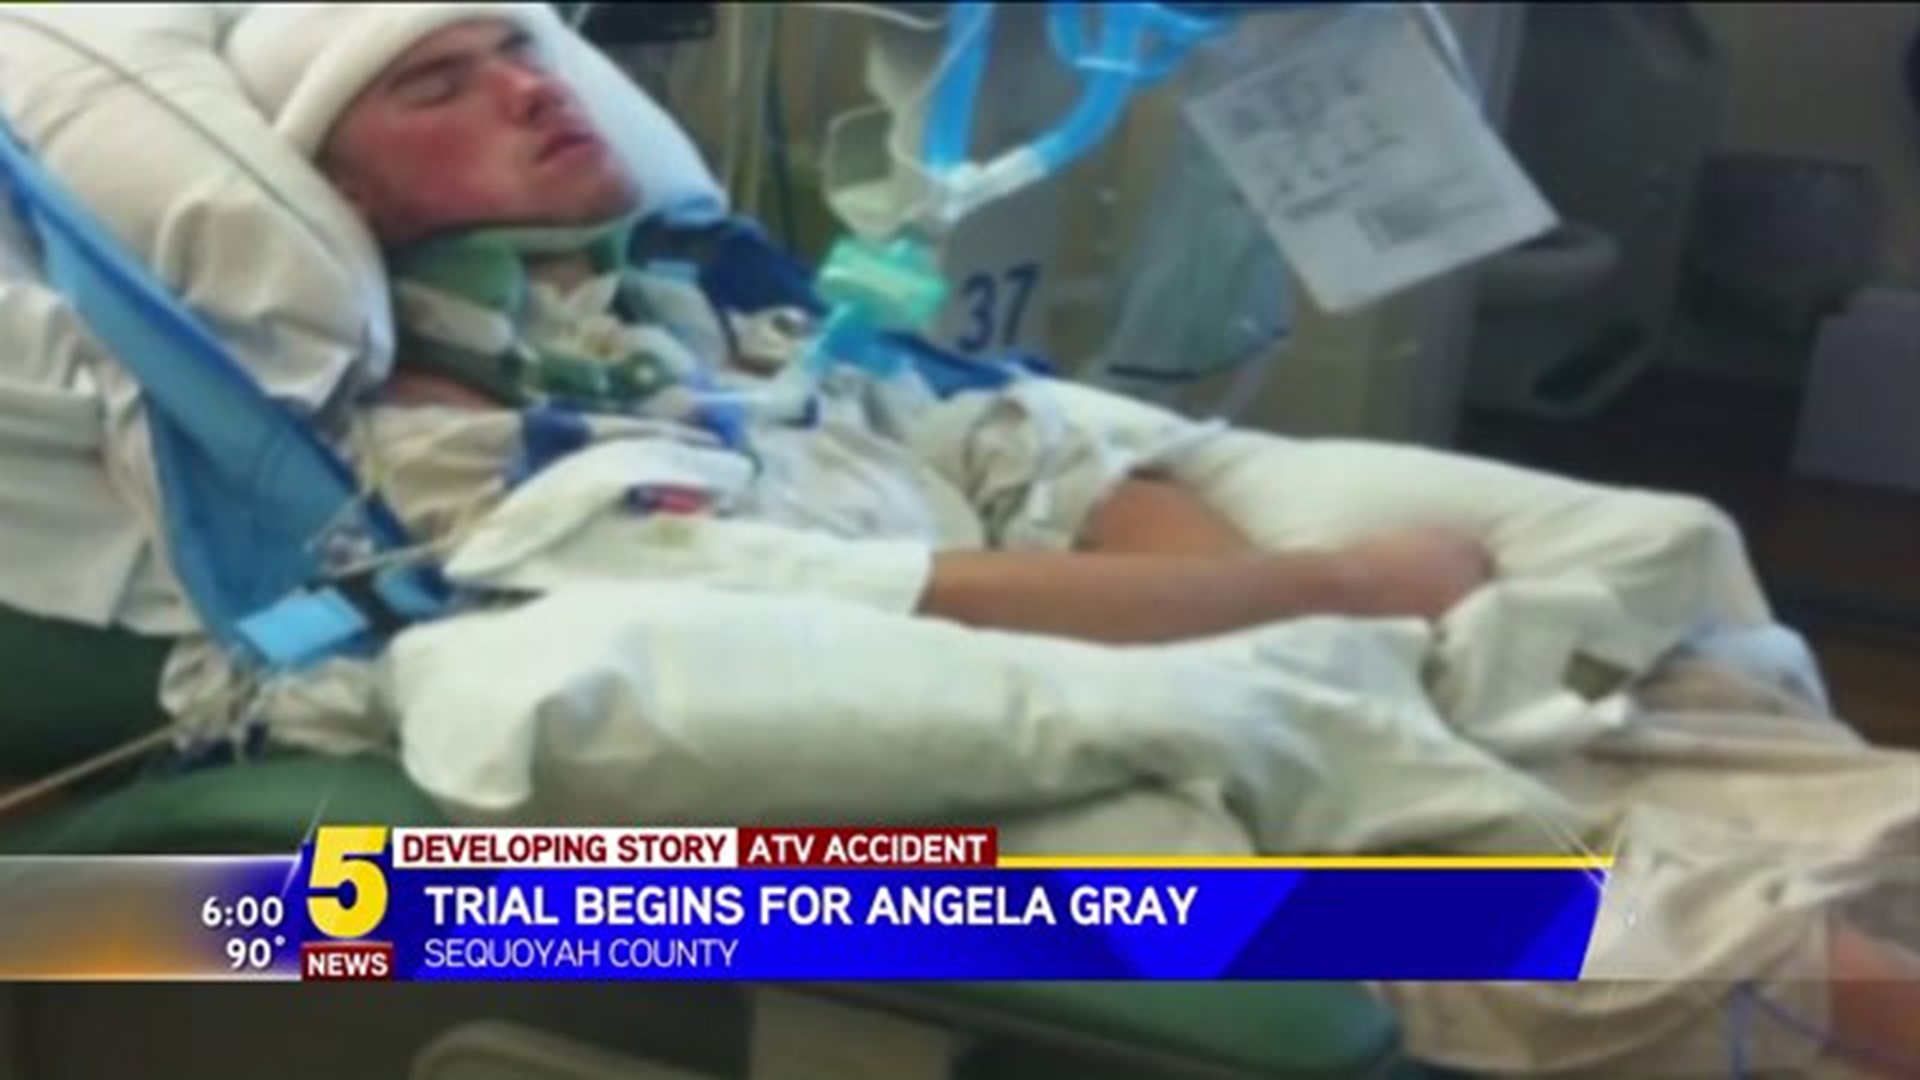 Trial Begins For Angela Gray